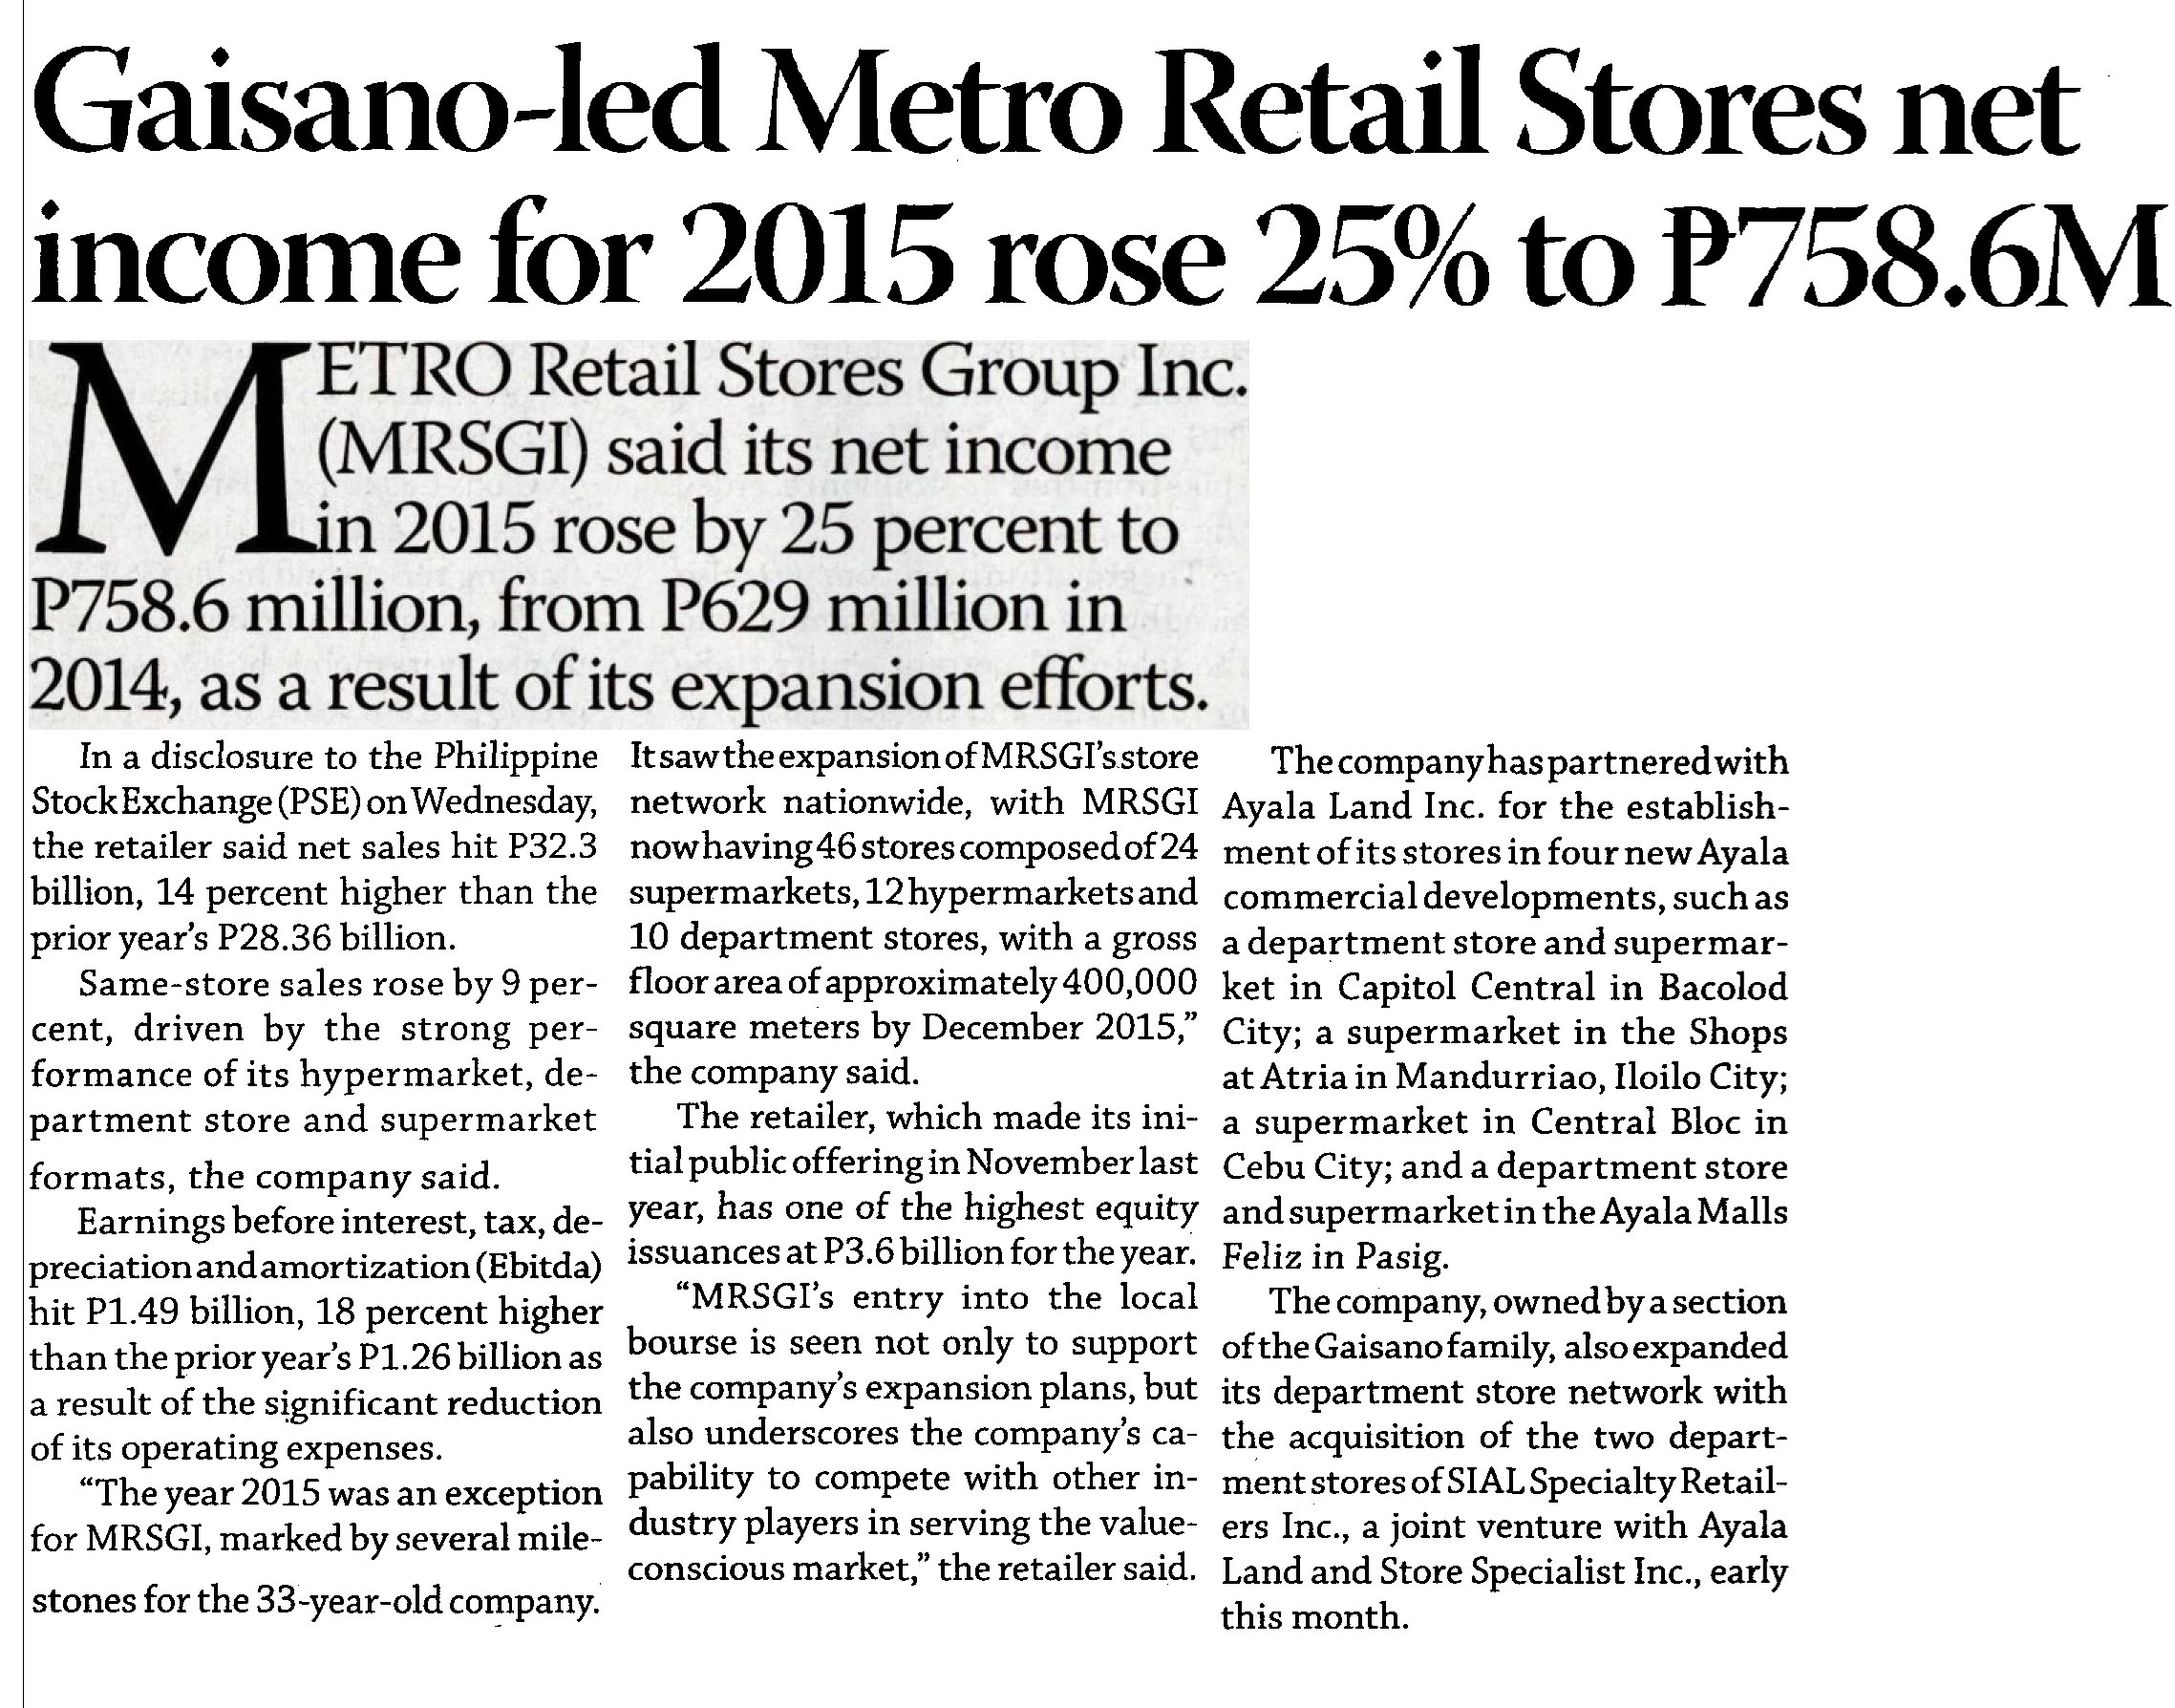 Gaisano led Metro Retail Stores net income for 2015 rose 25 to P758.6M Business Mirror